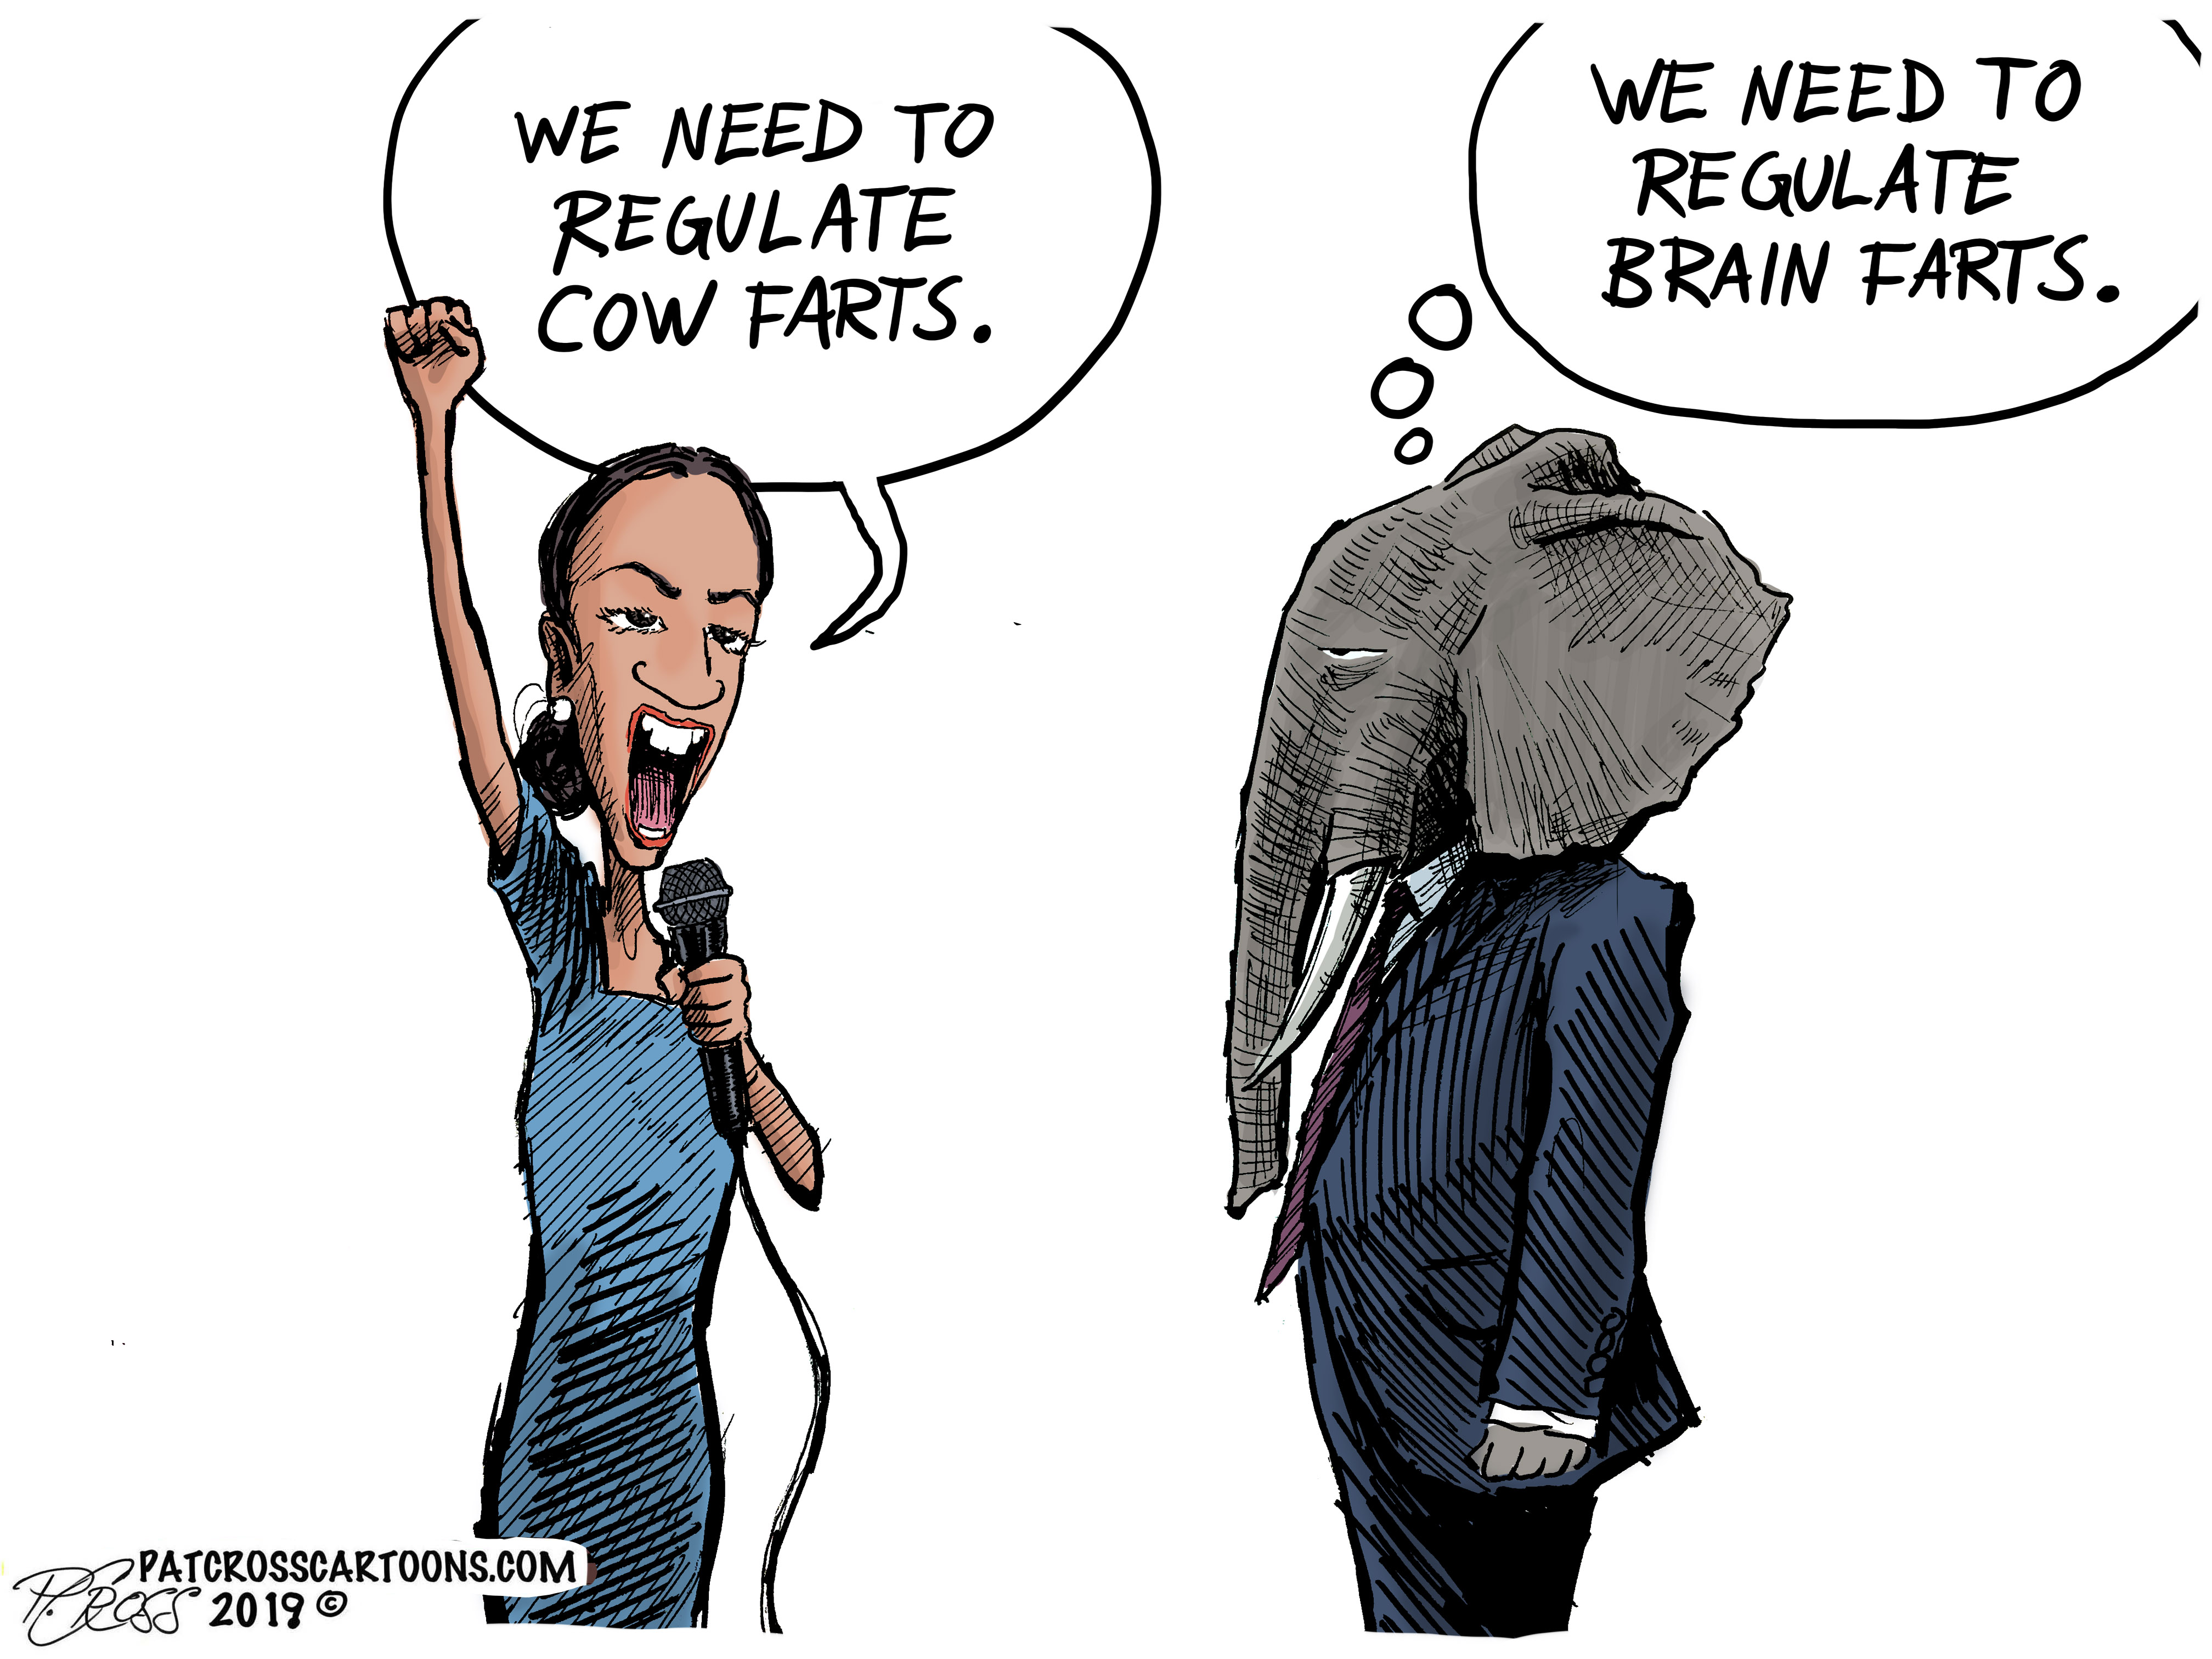 2019 aoc cartoons - We Need To Regulate Cow Farts. We Need To Regulate Brain Farts. Patcrosscartoons.Com Ppas 2019